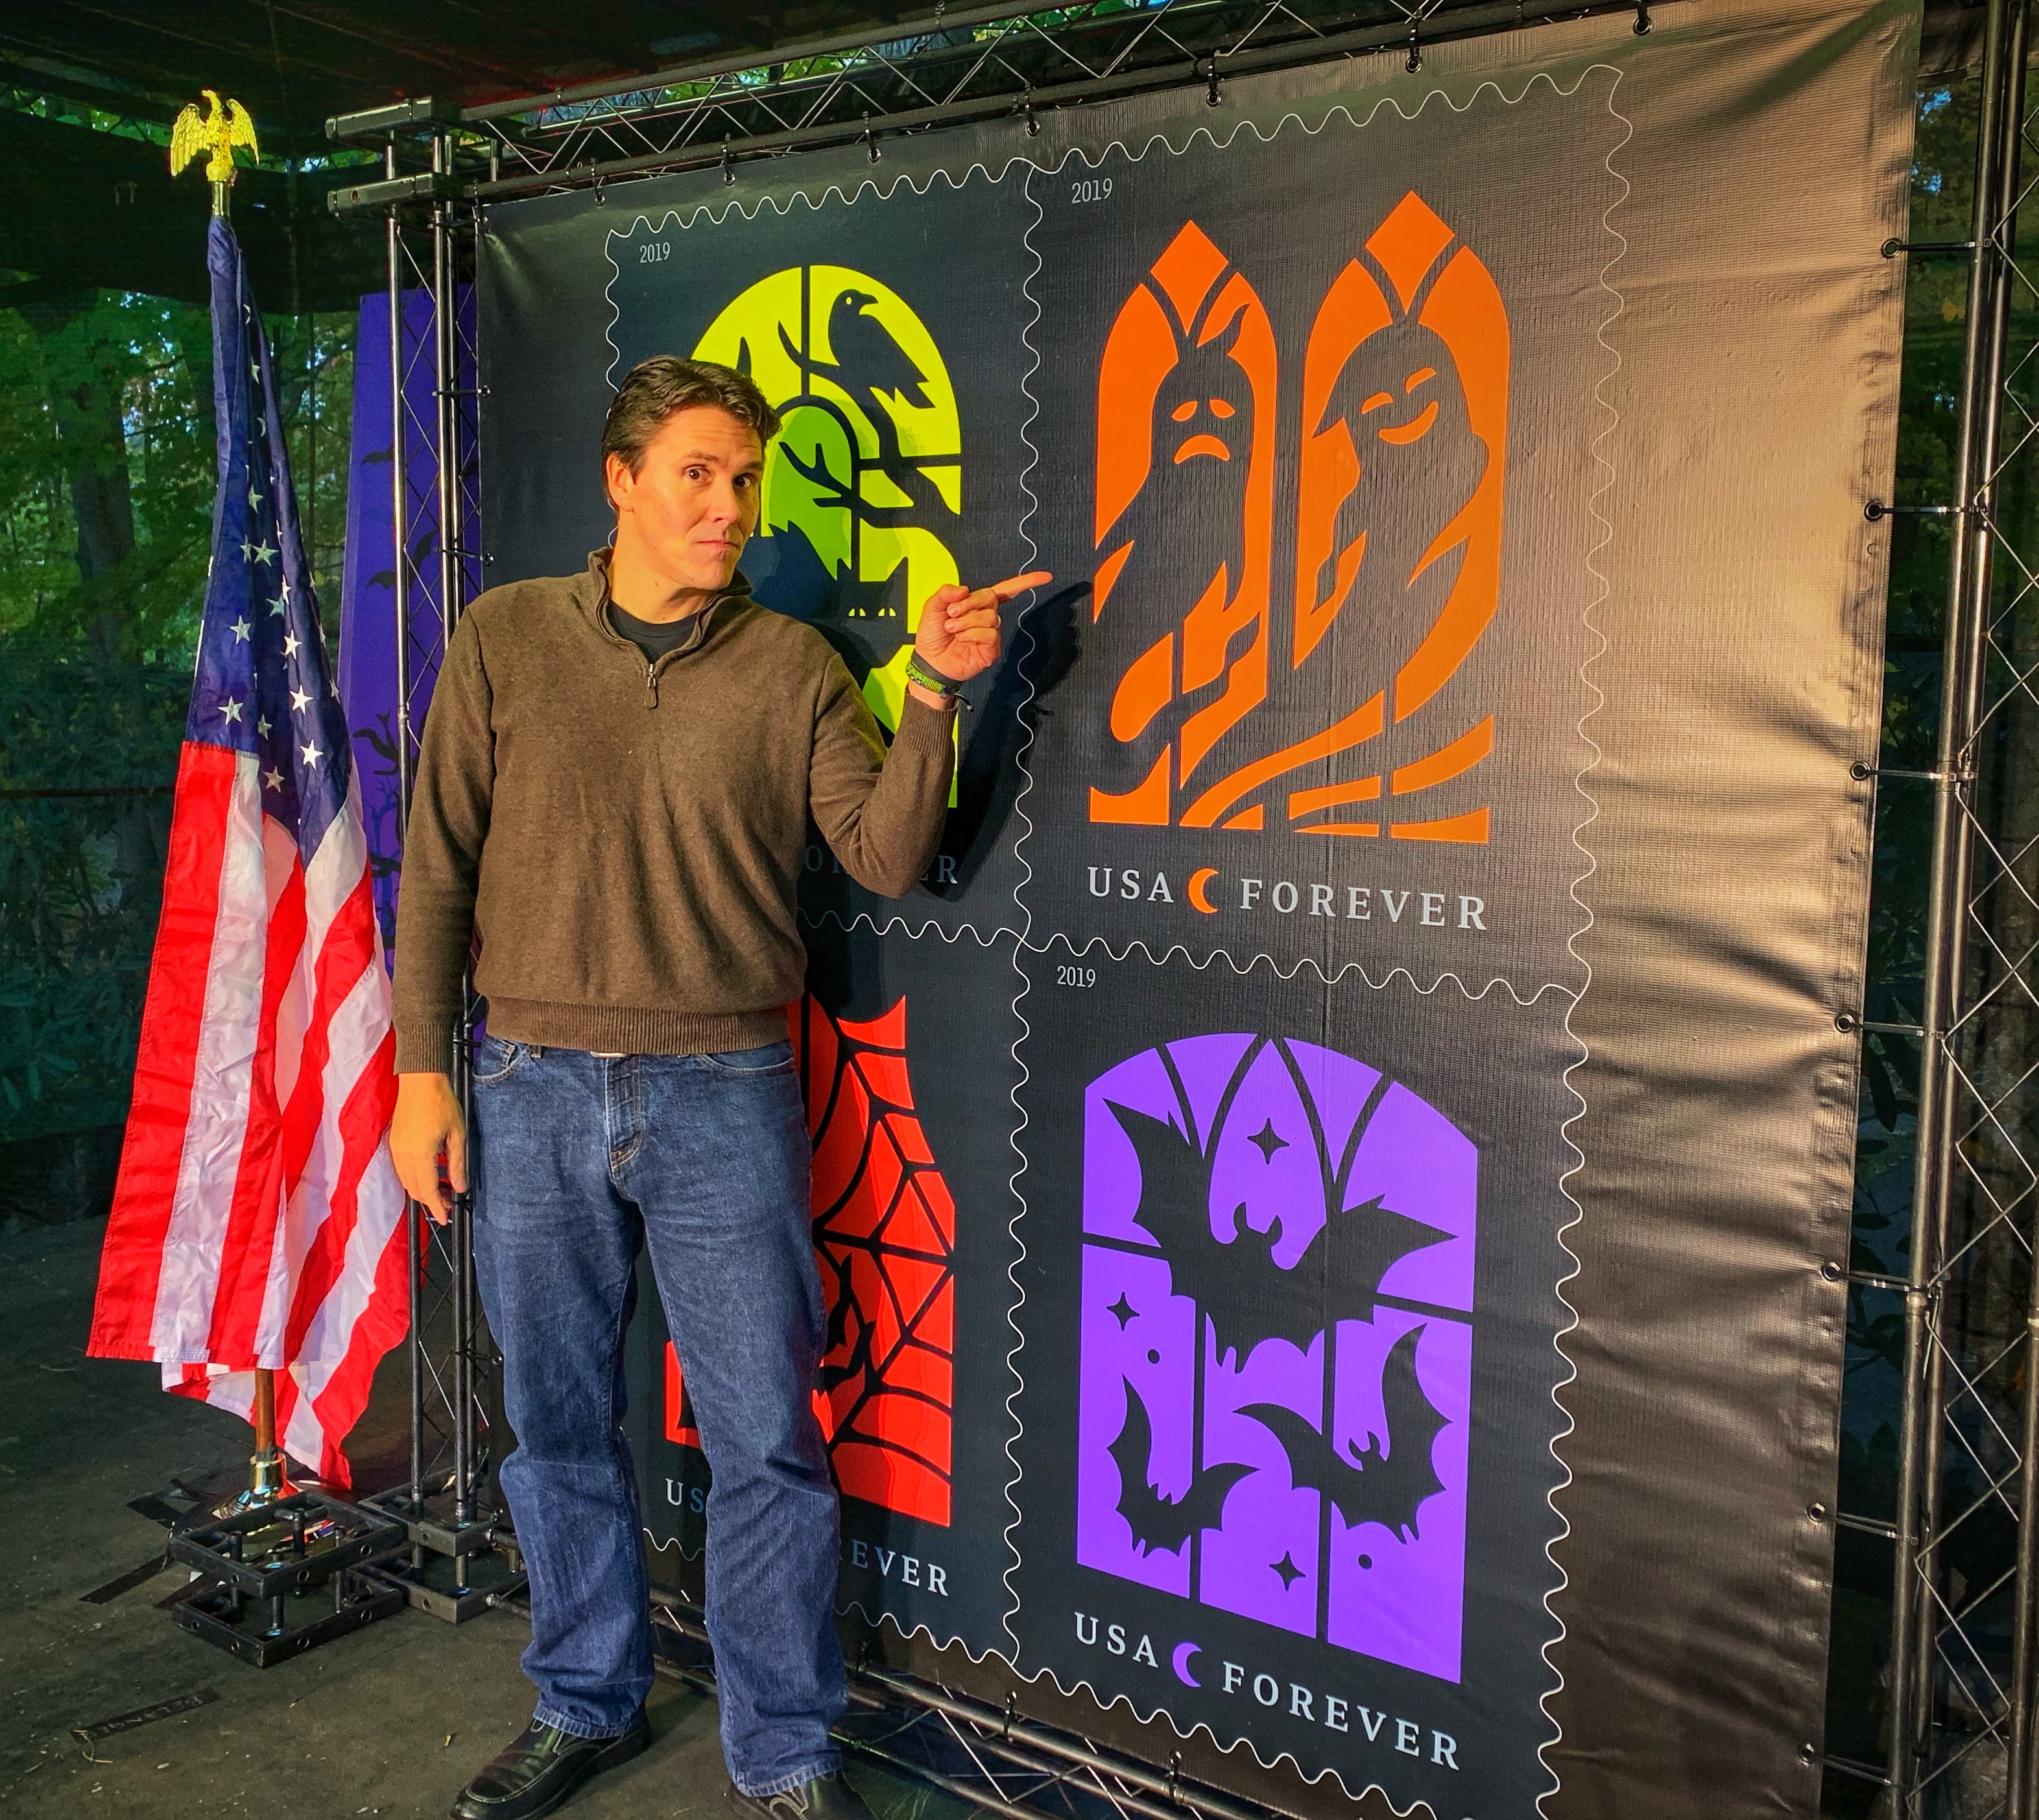 Jeff Belanger at the 2019 First Day of Issue Launch of the 2019 US Postal Service's Halloween Stamps.